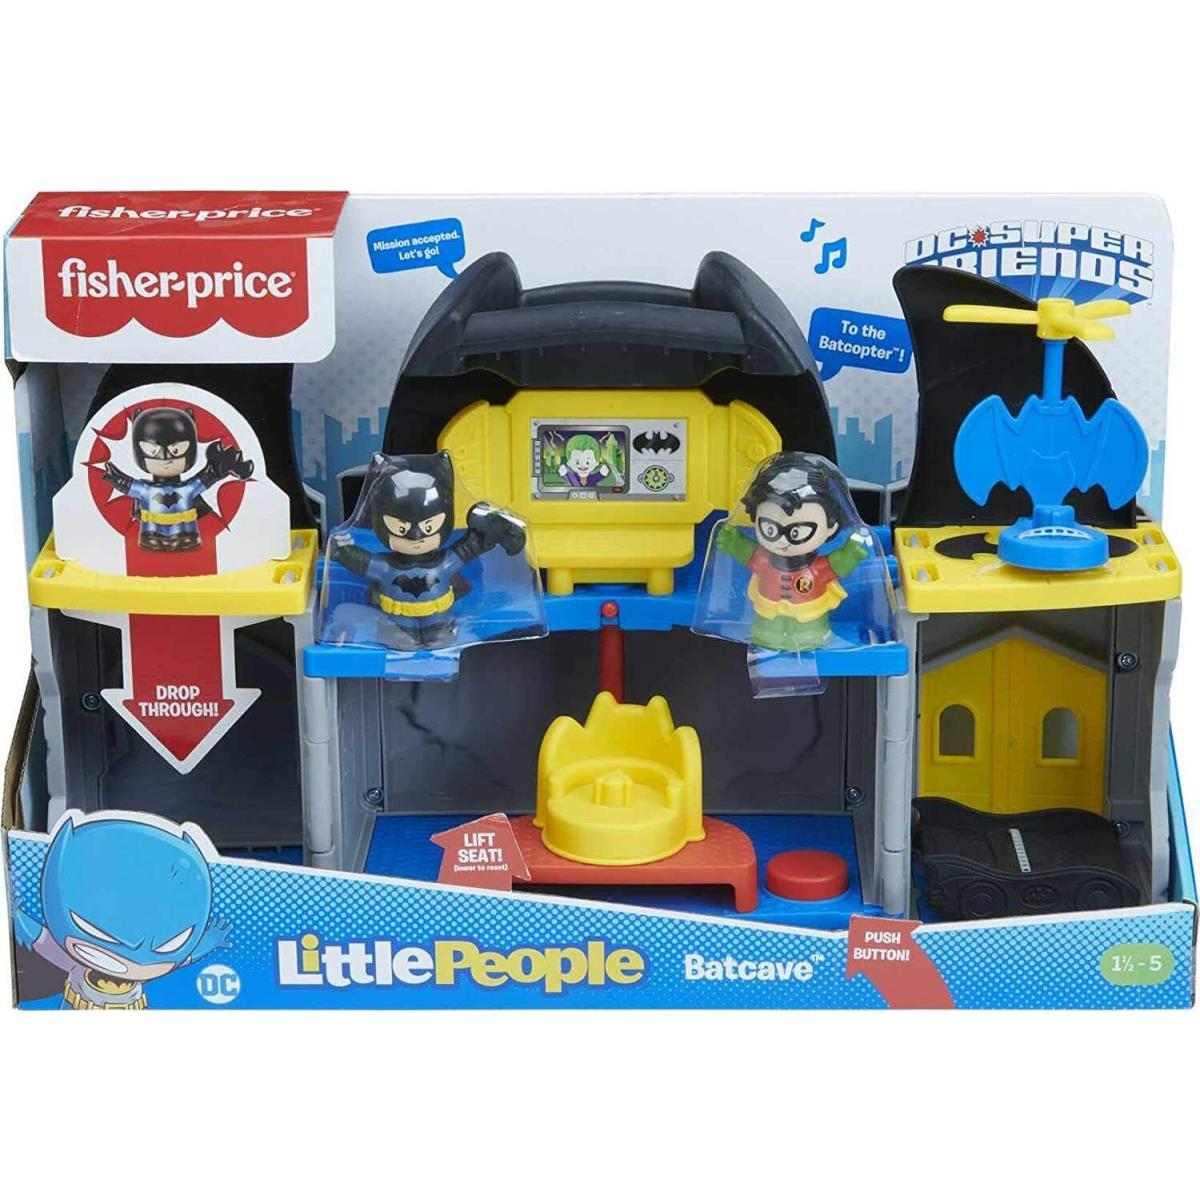 Fisher-price Little People DC Super Friends Batcave Batman Playset with Figures